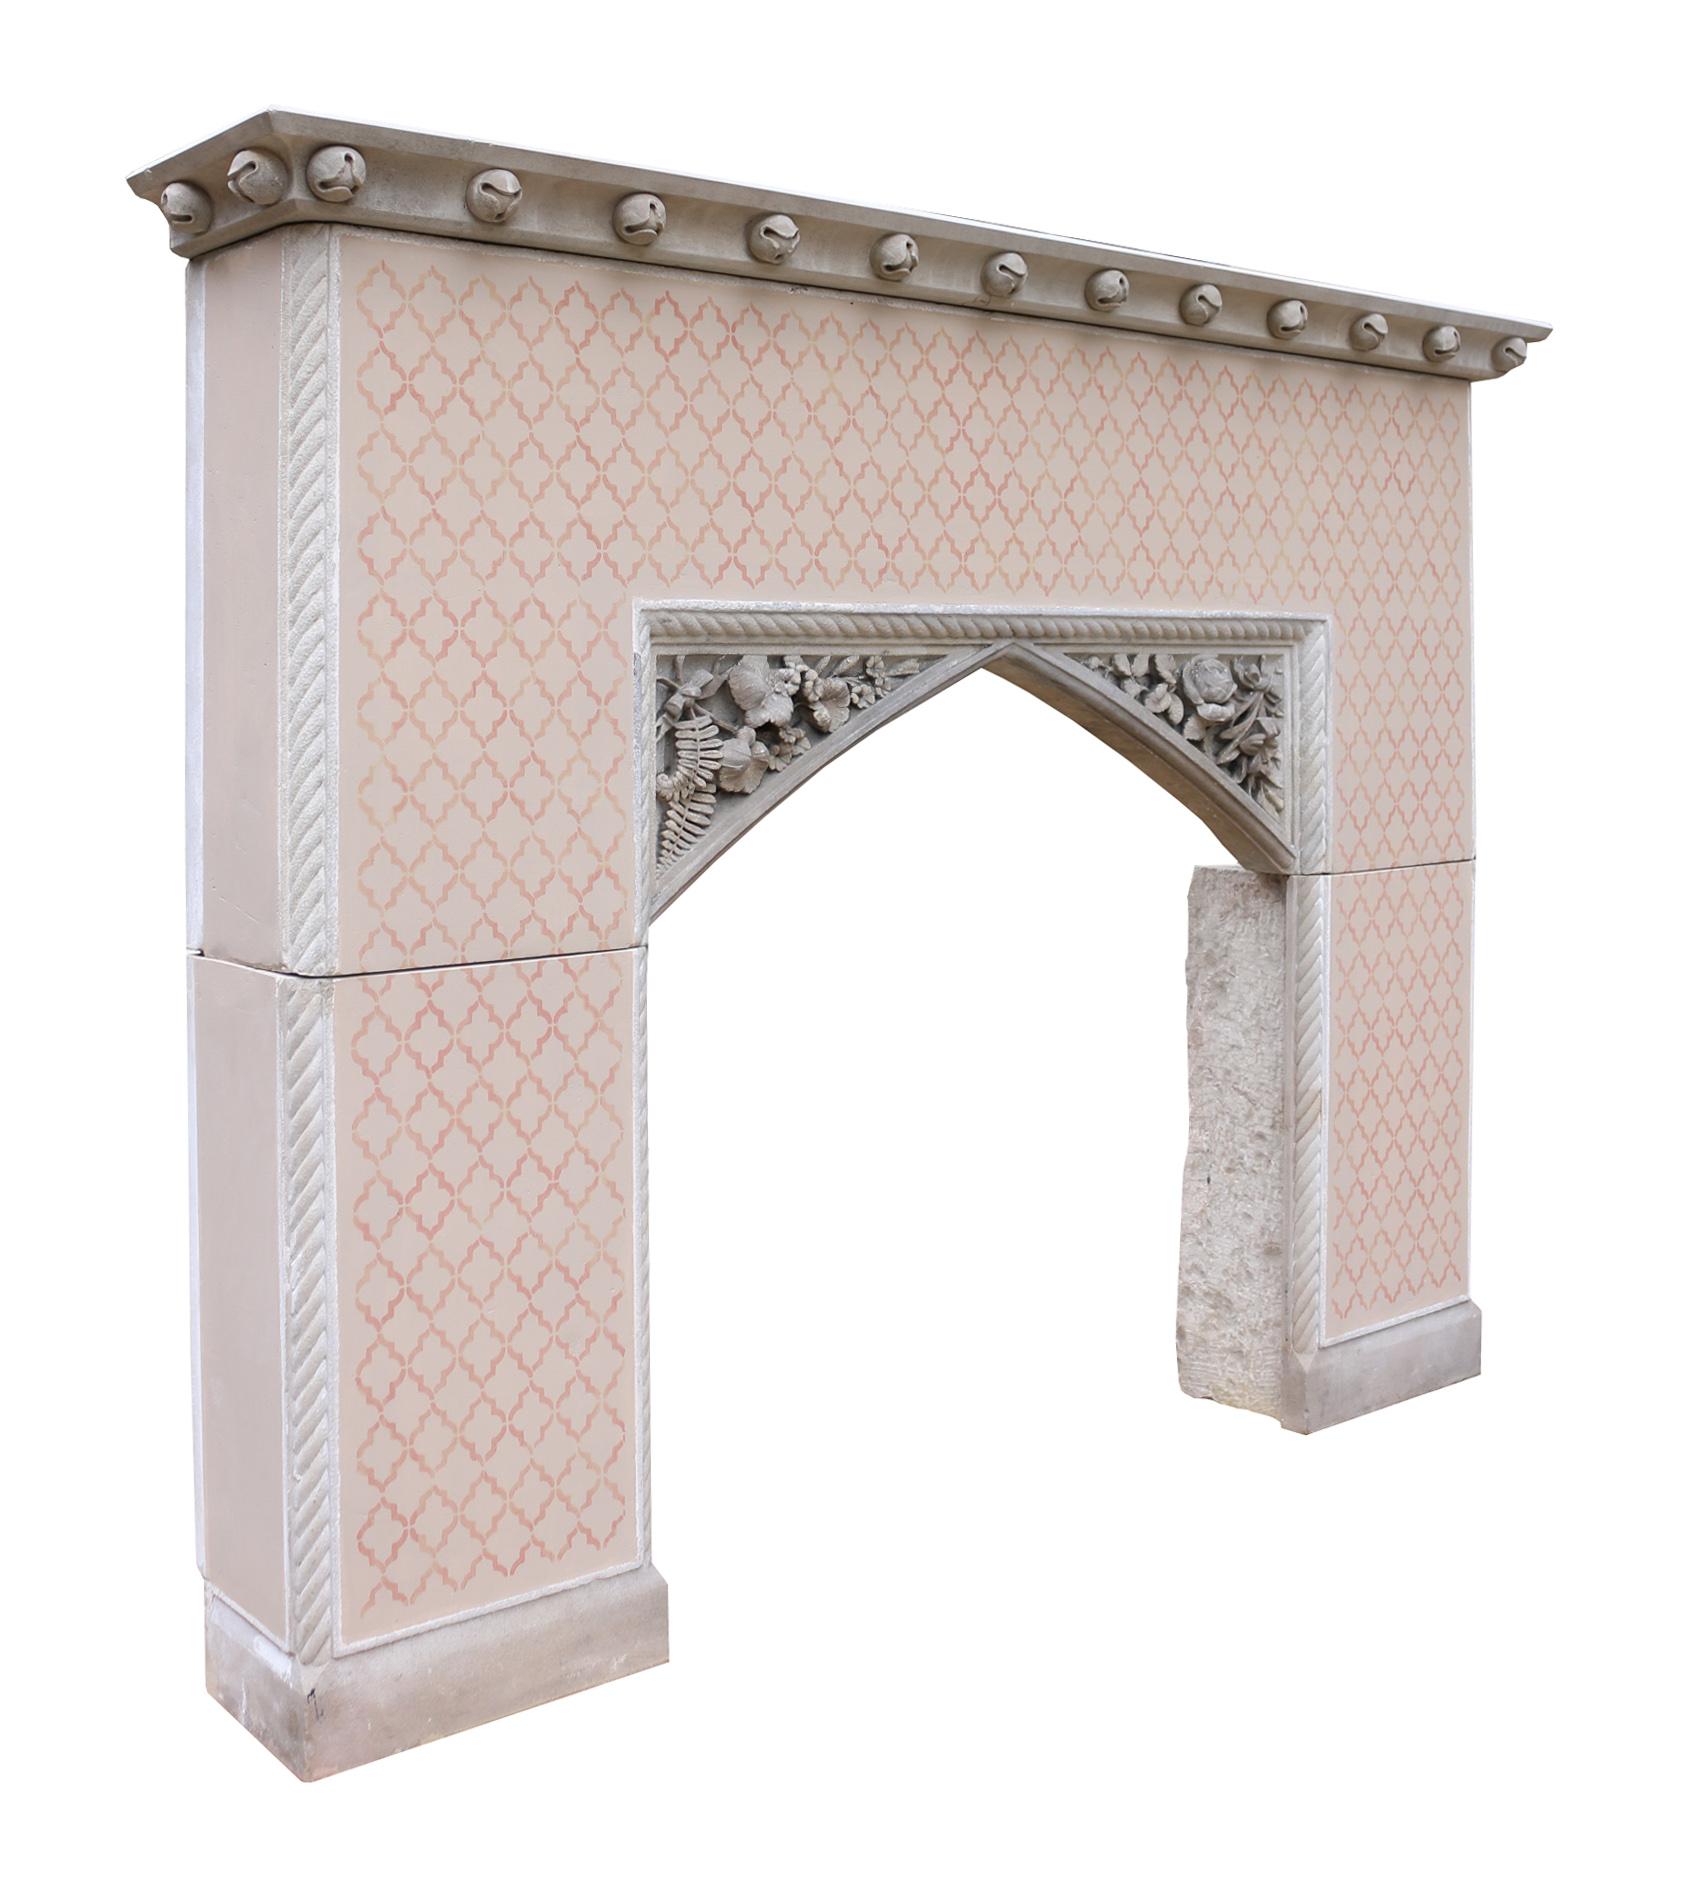 Gothic Revival Fire Surround In Good Condition For Sale In Wormelow, Herefordshire